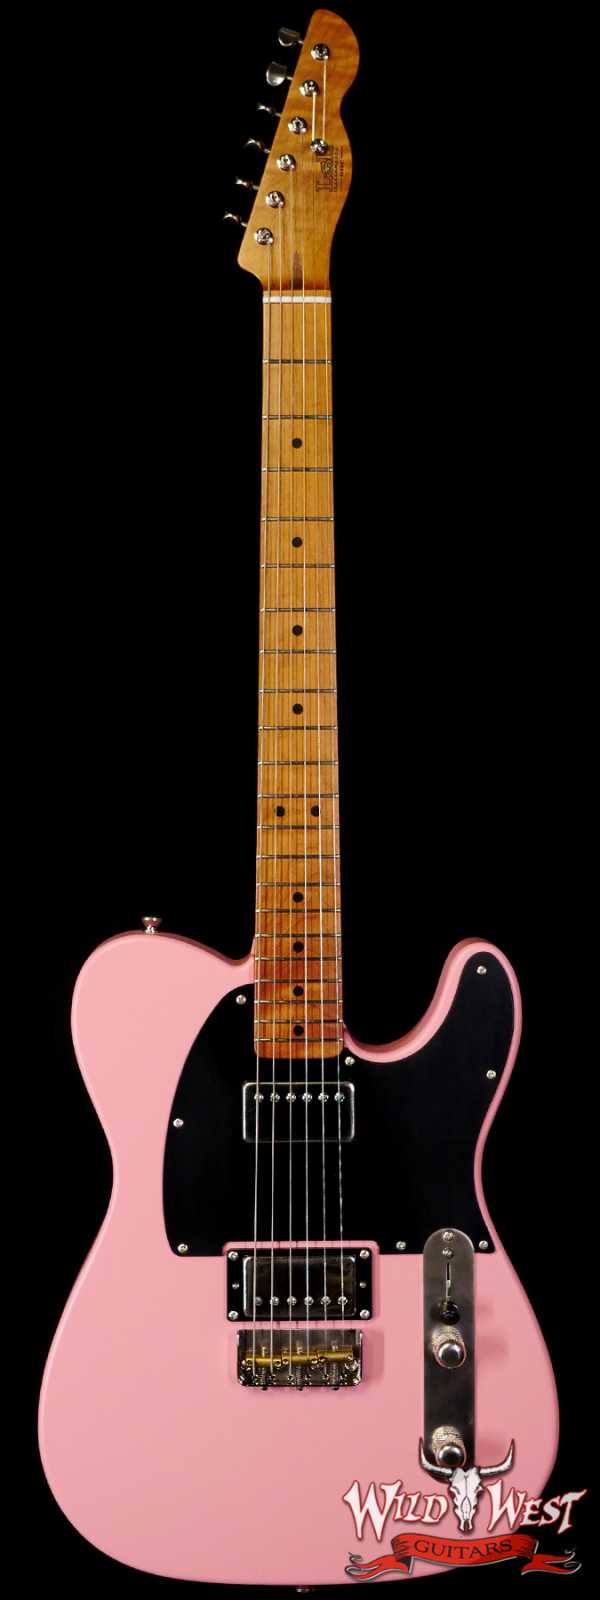 LsL T-Bone One HH Roasted Flame Maple Neck Double Humbucker Shell Pink